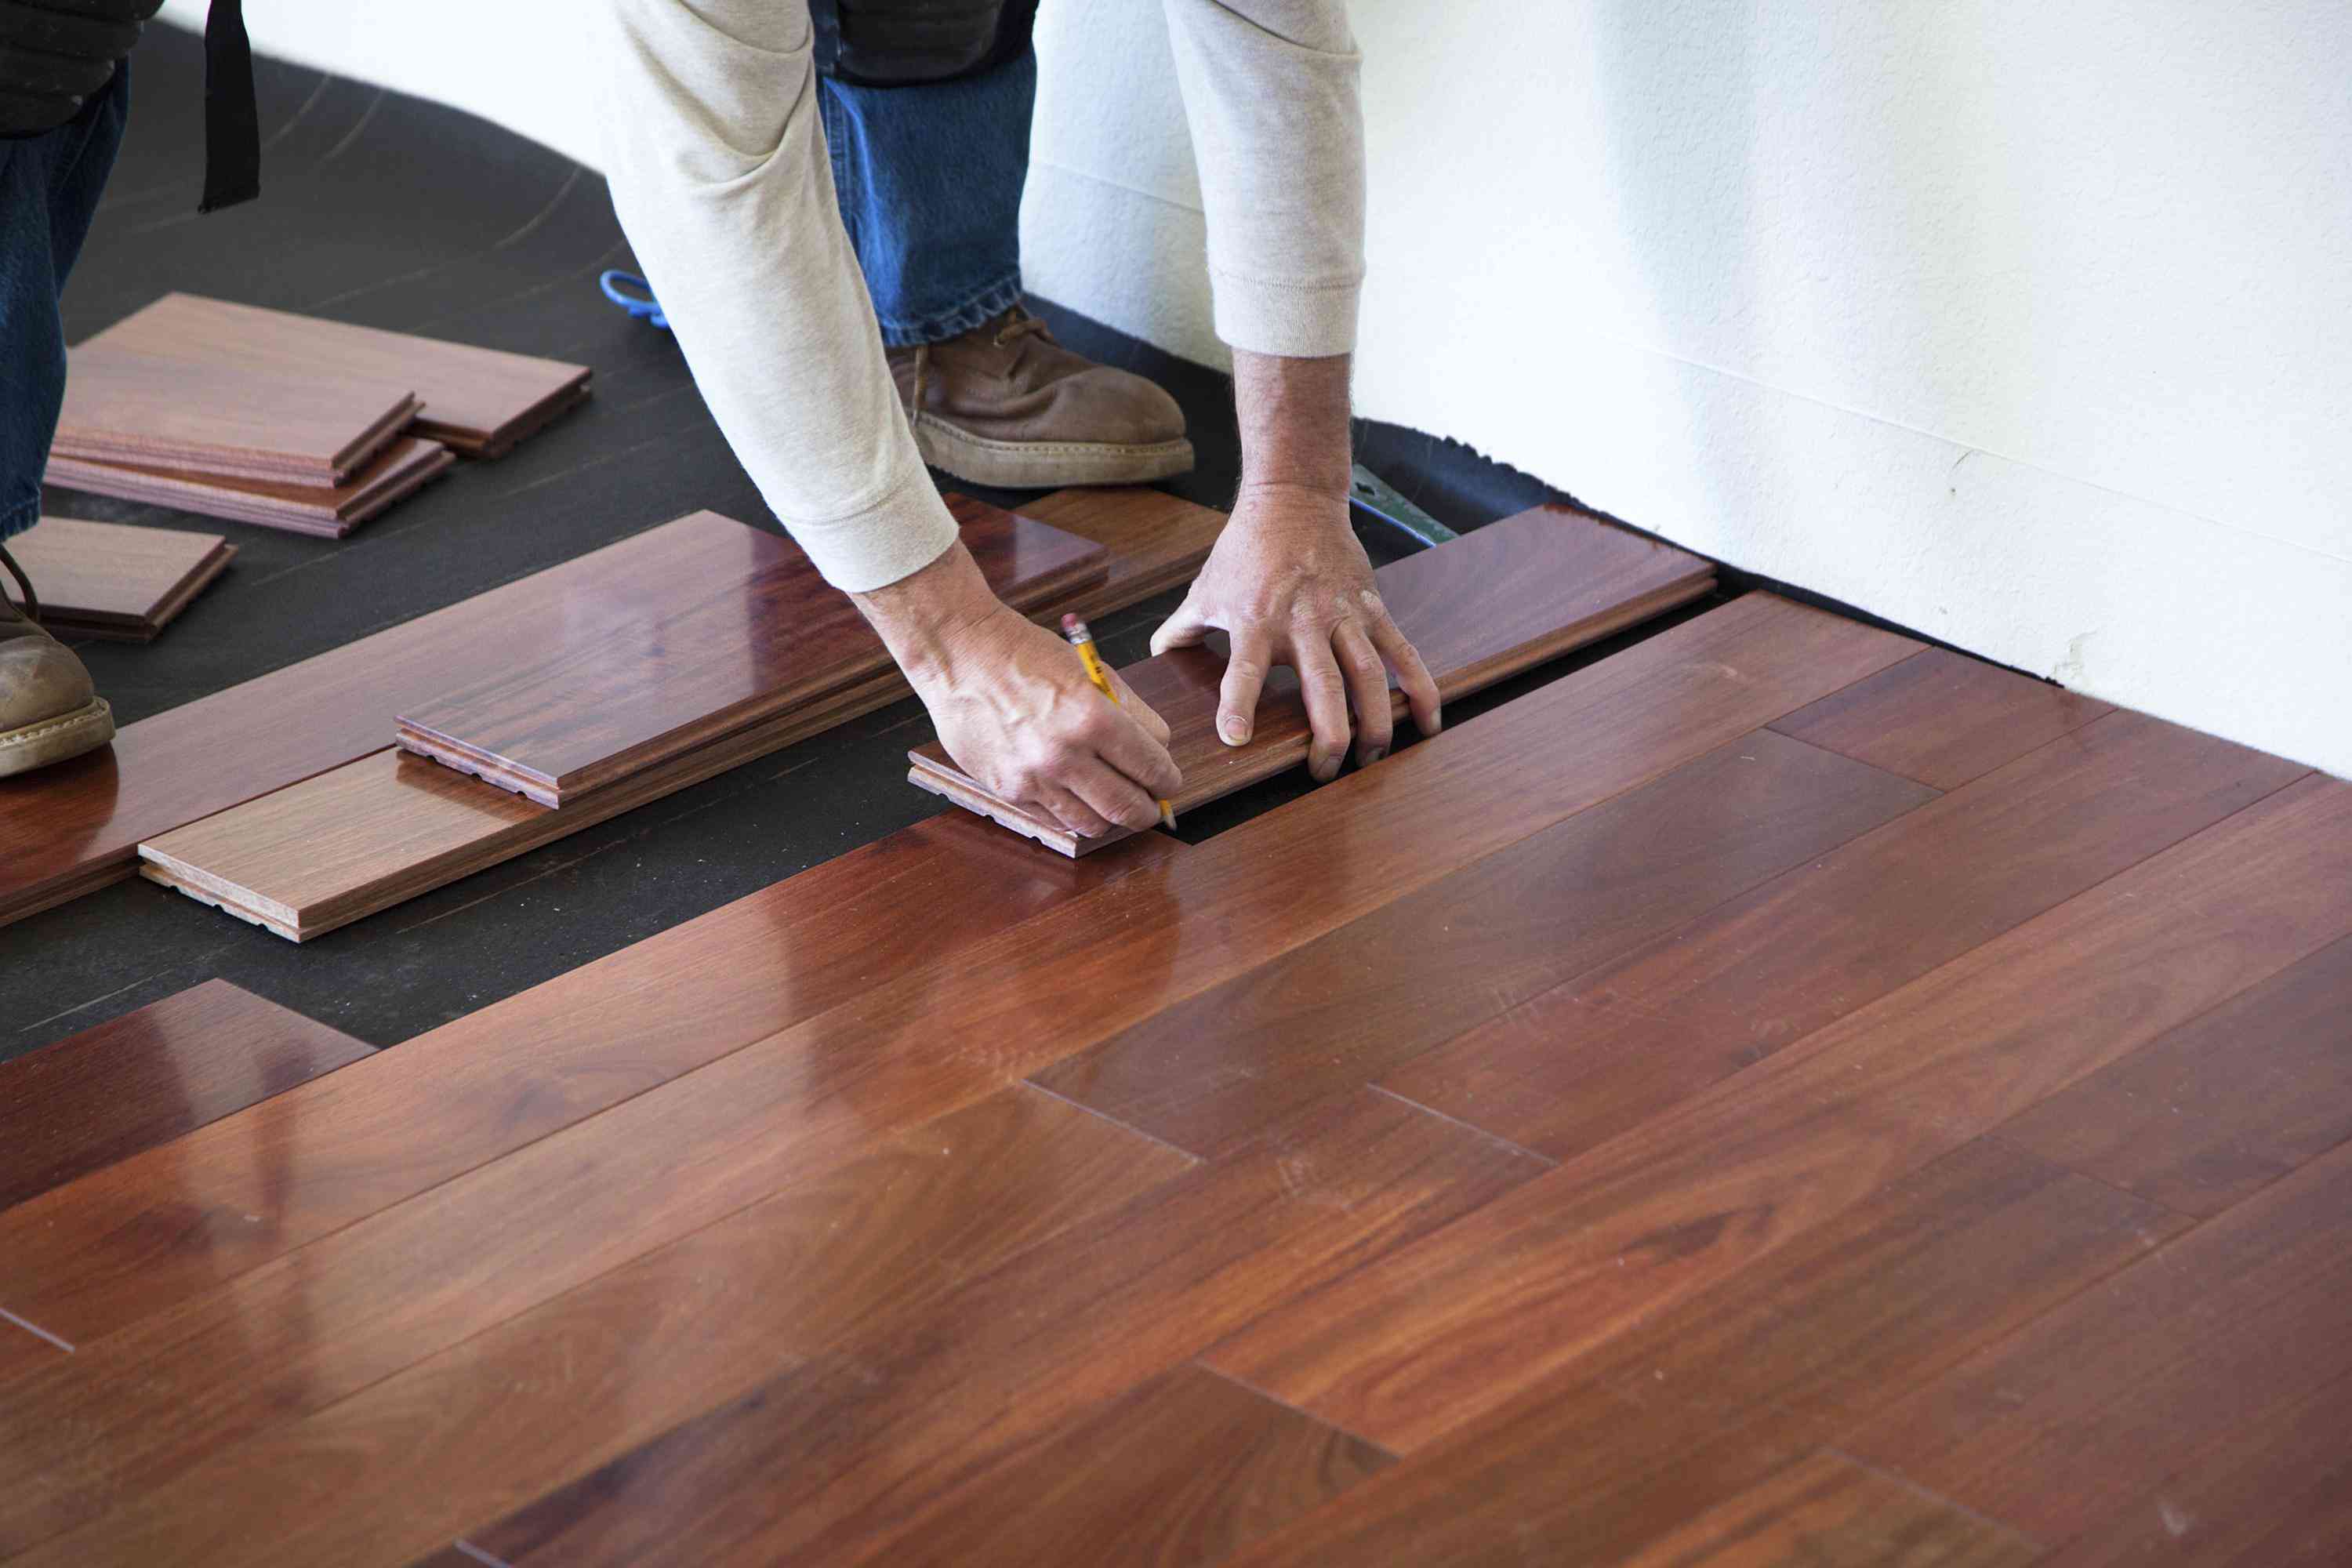 What to use instead of wood flooring in a bathroom